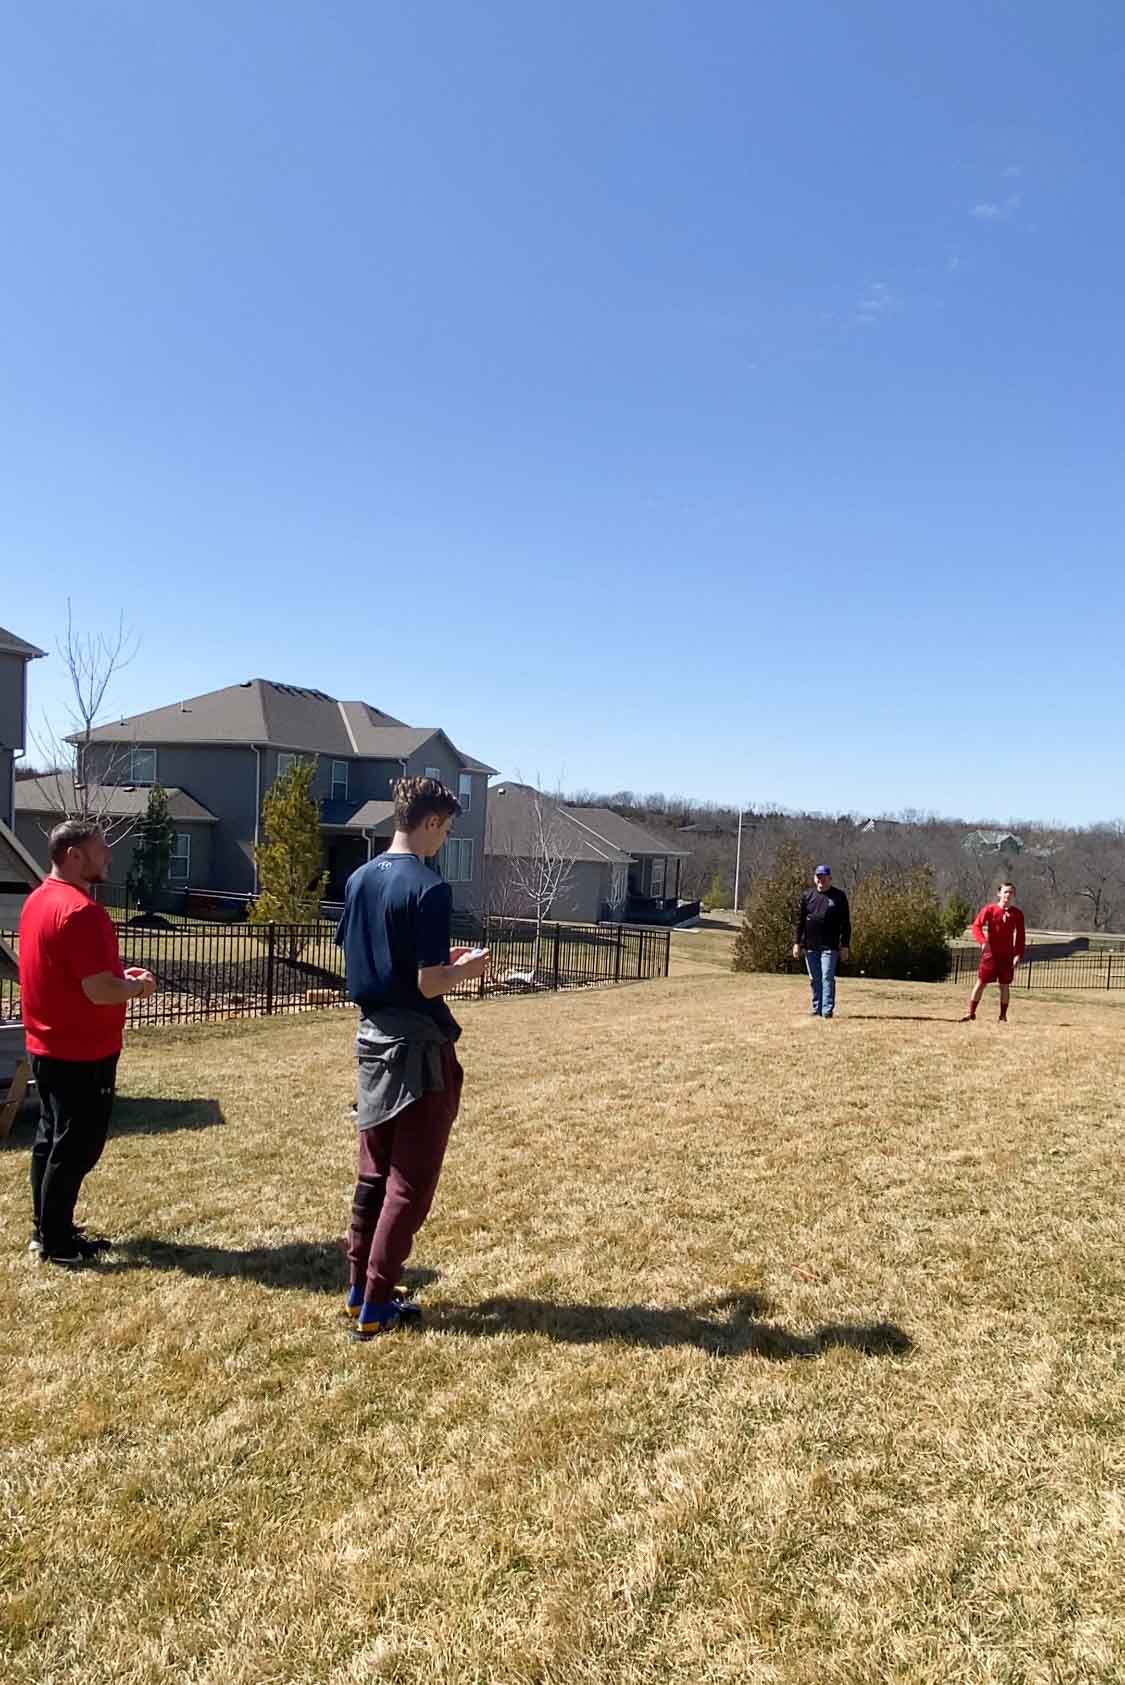 teens and adult men standing in a yard